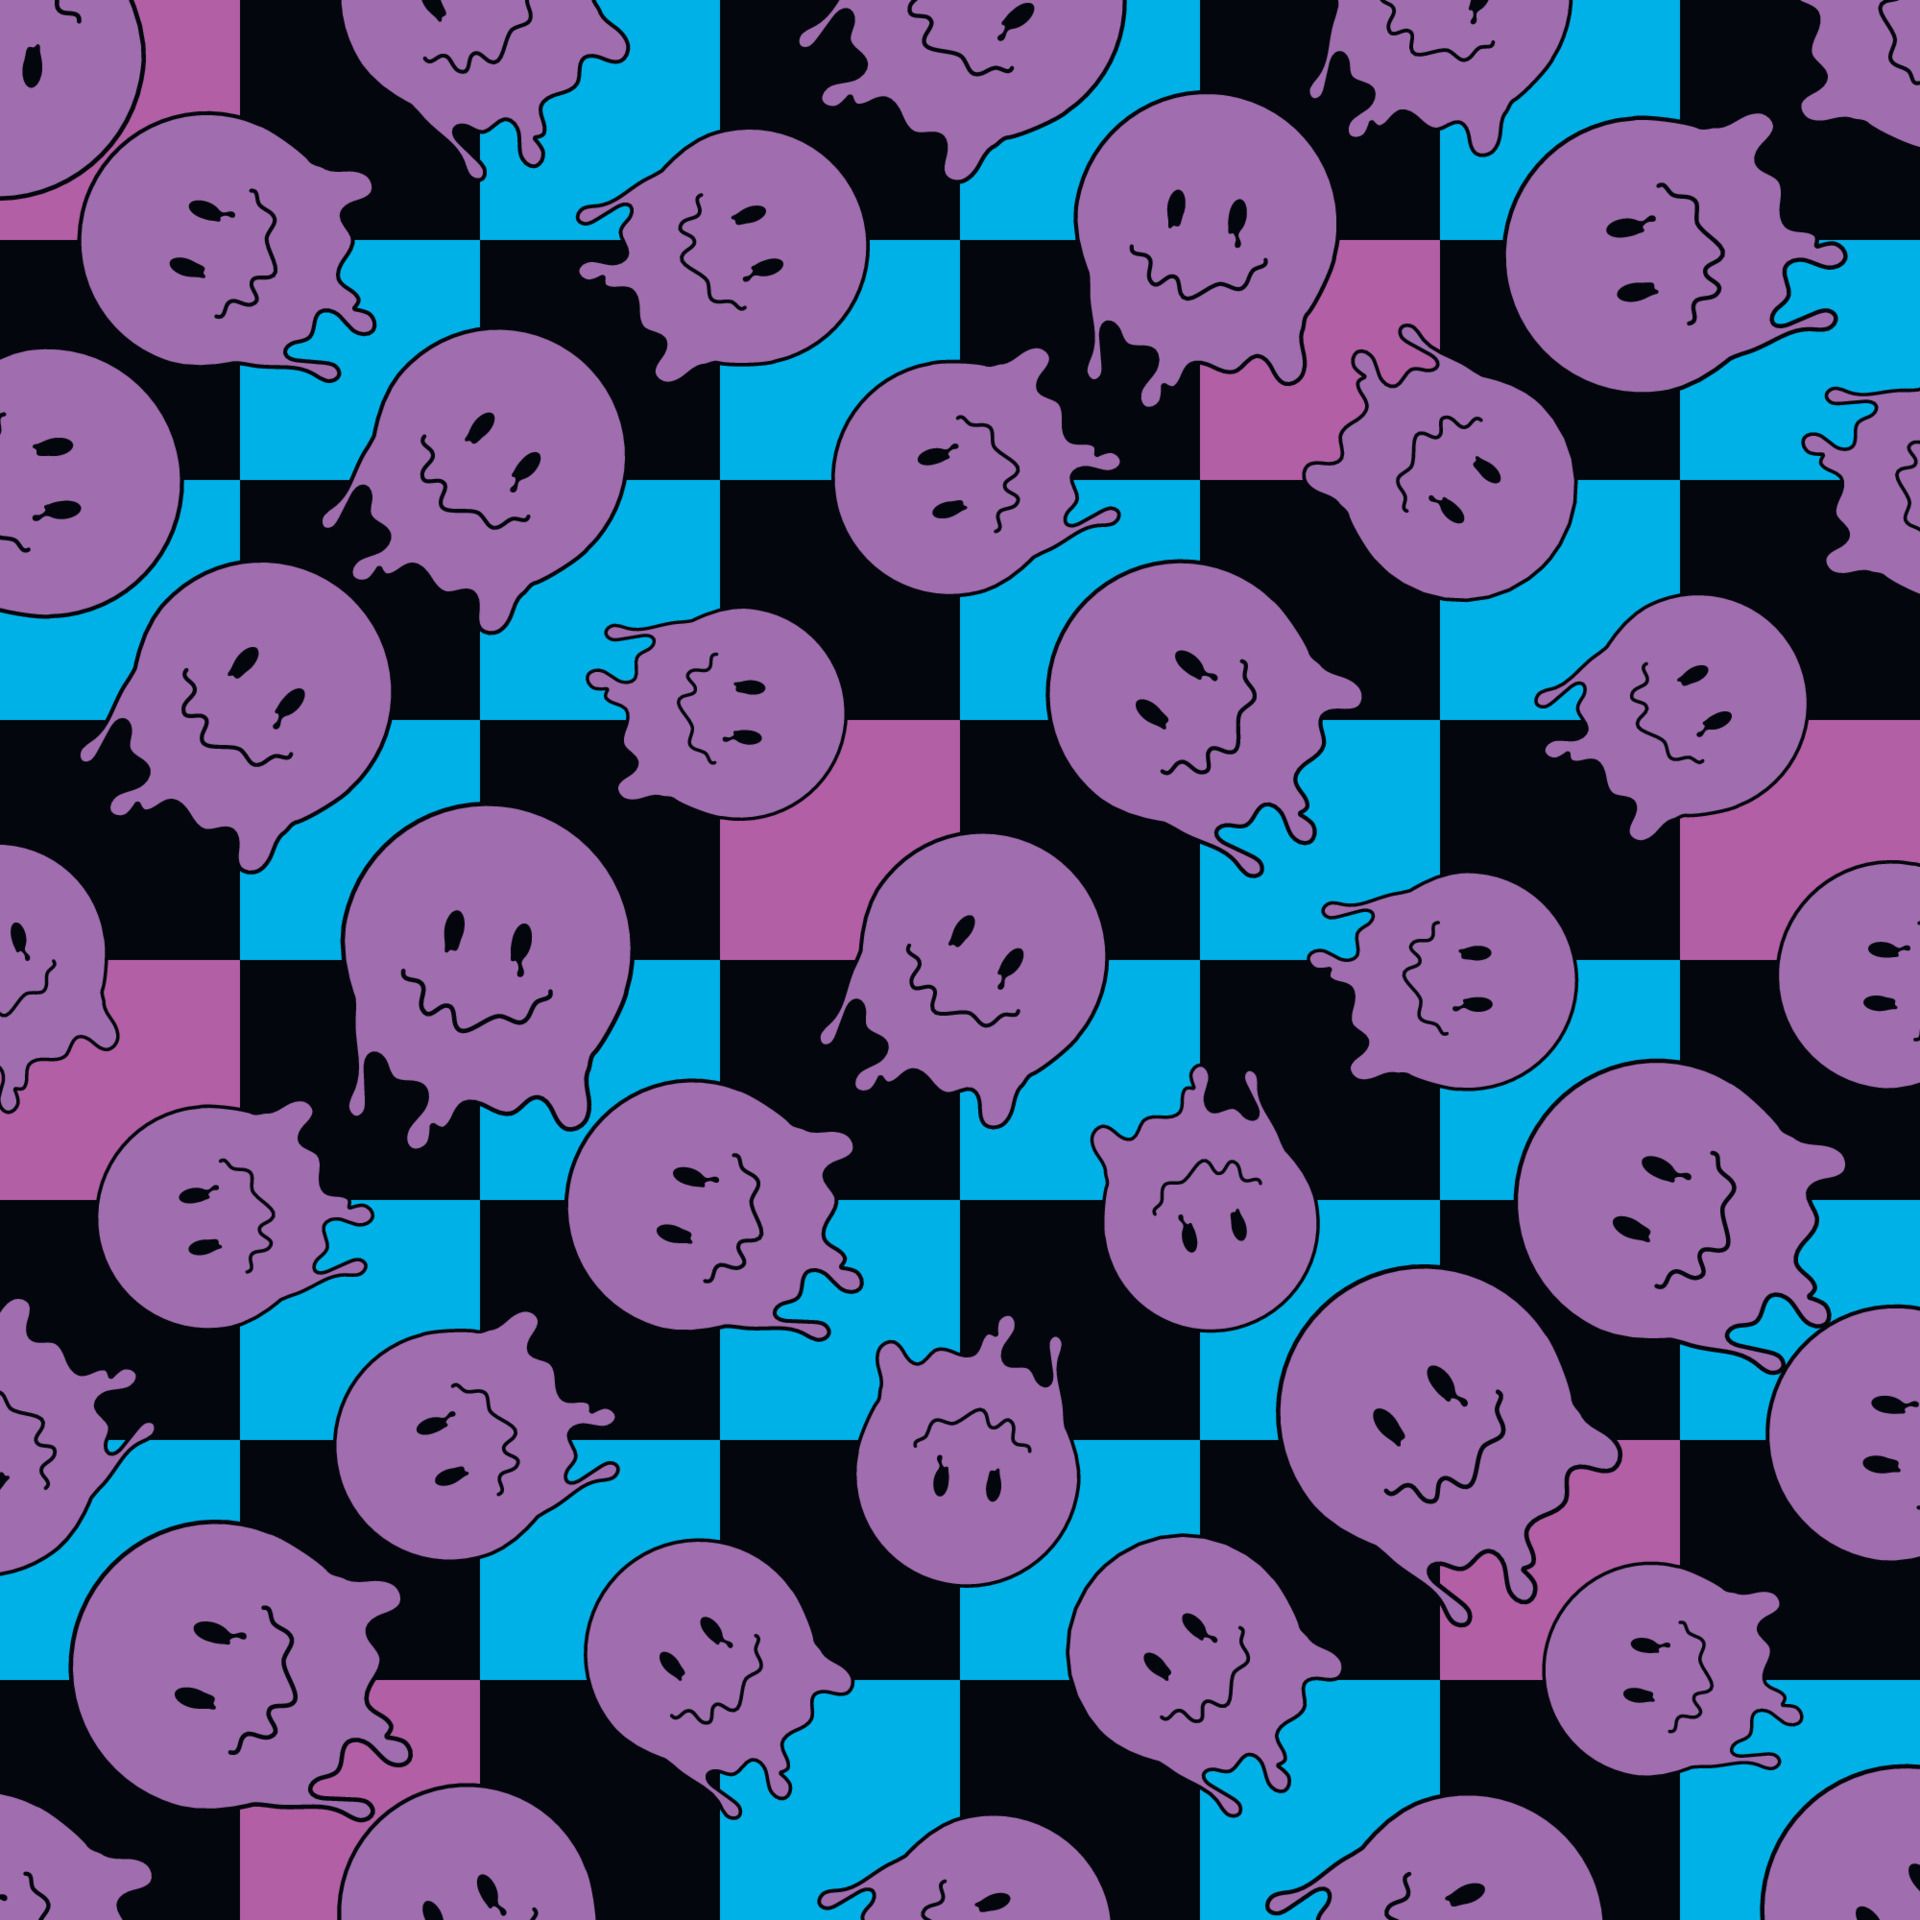 A pattern of melting purple ghosts on a black and blue checkered background. - Y2K, trippy, funny